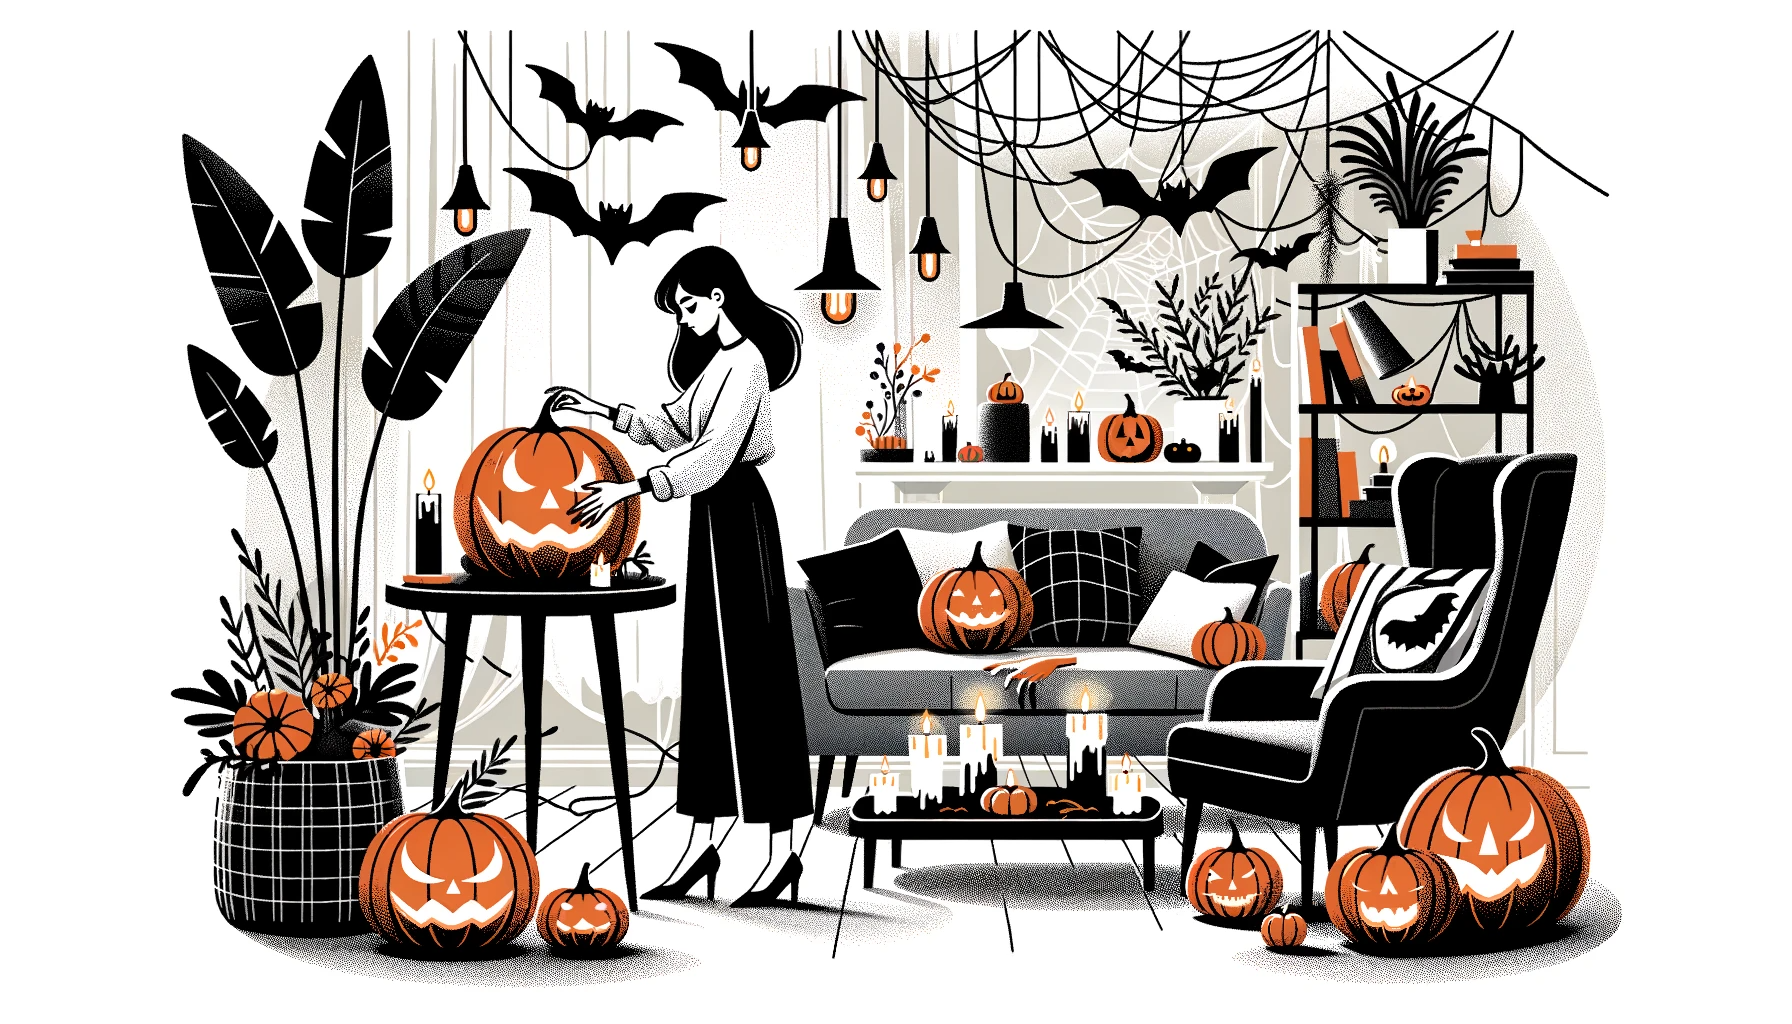 A woman stands in a modern living room adorned with Halloween decorations